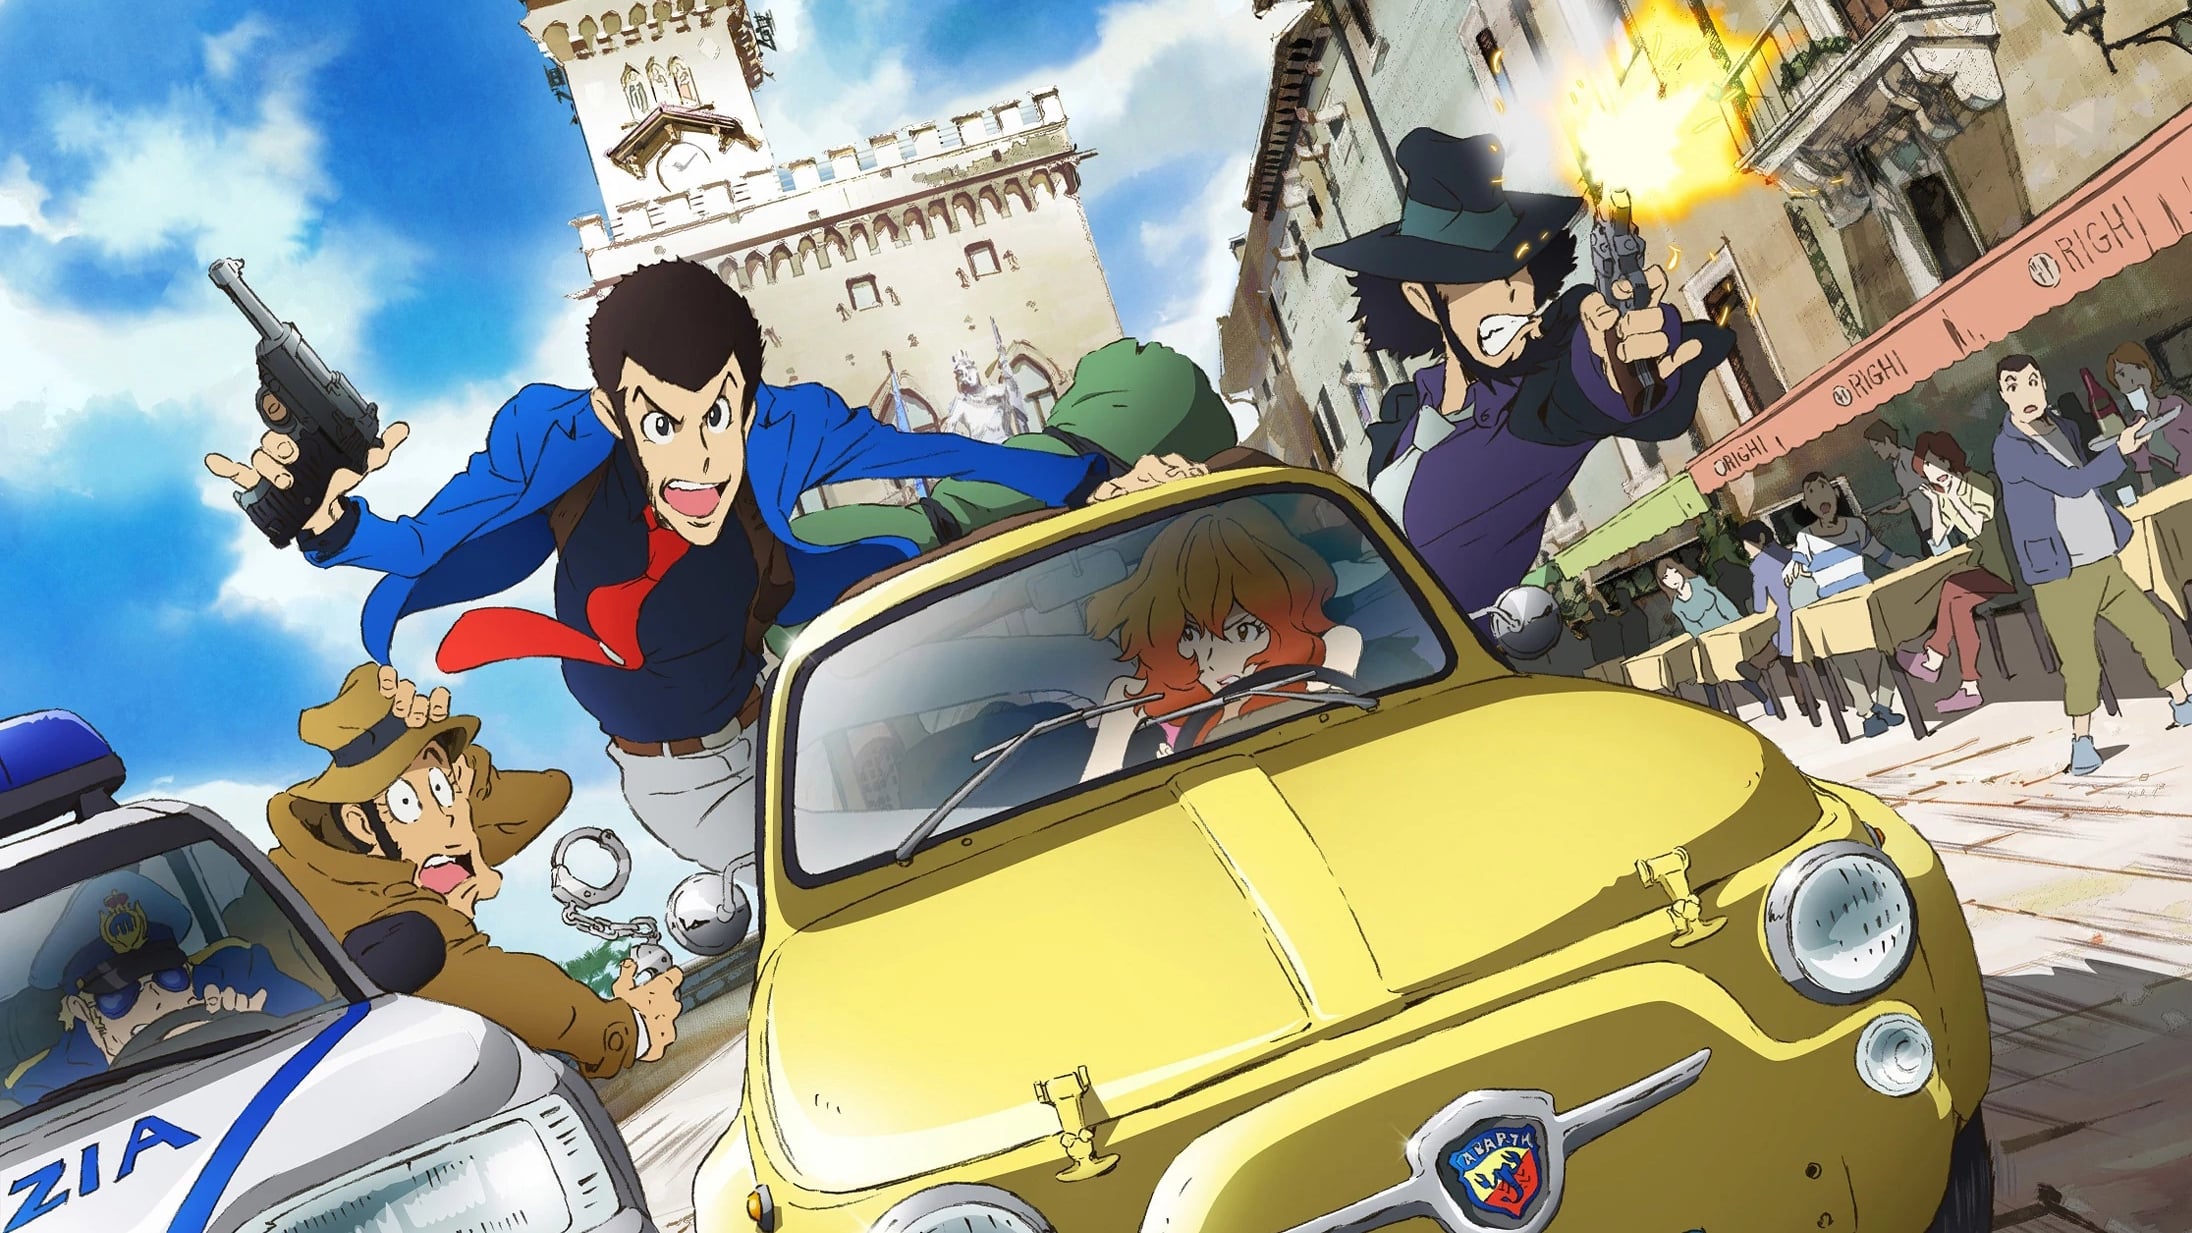 The End of Lupin the Third